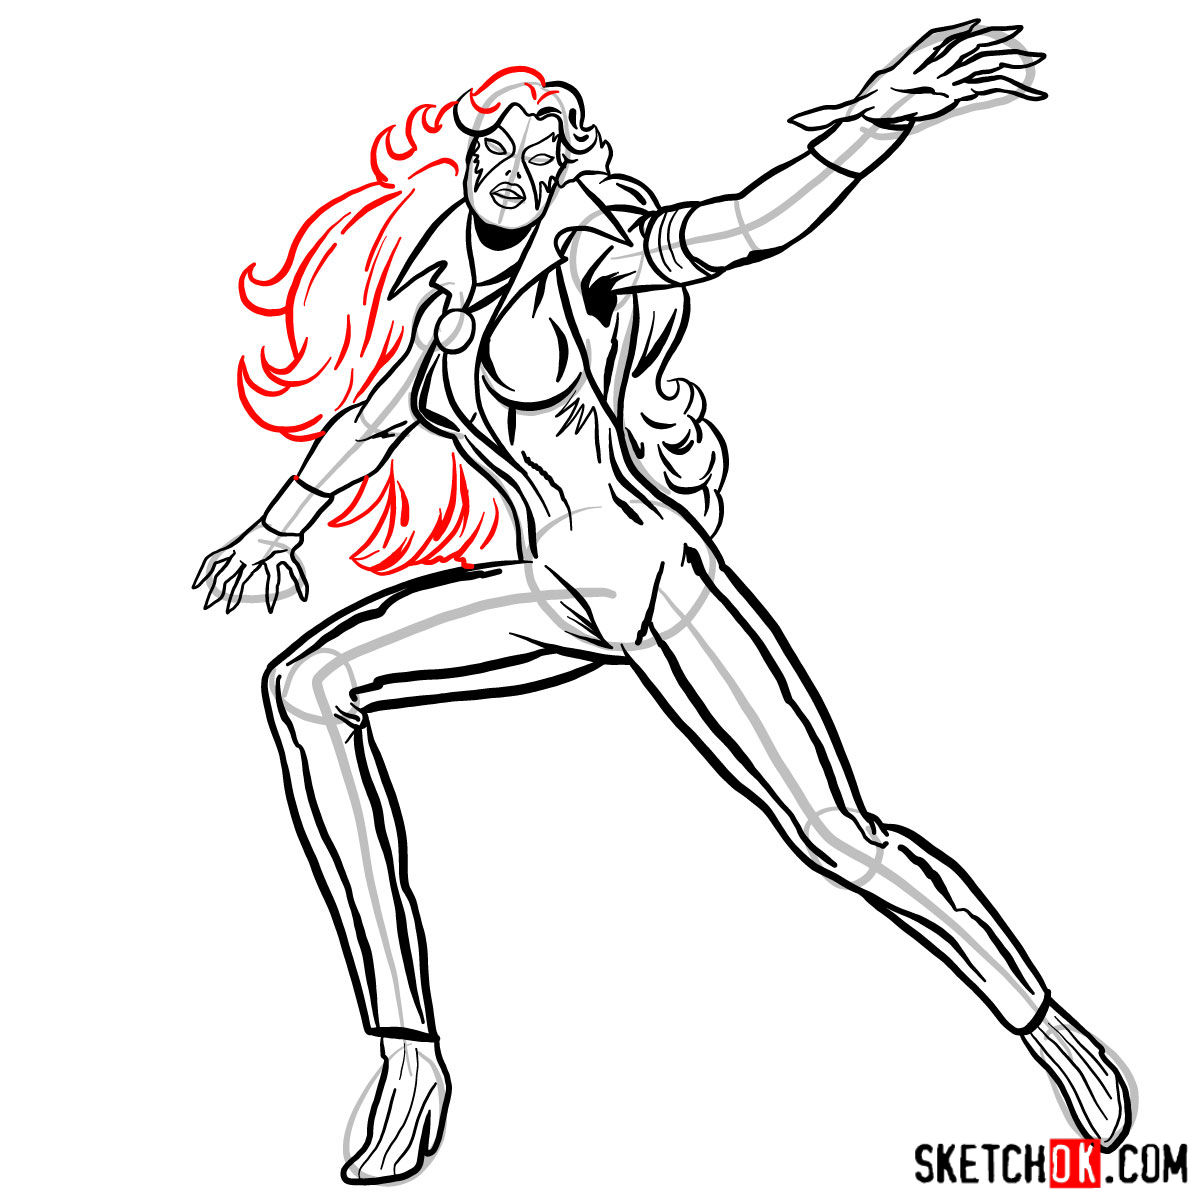 How to draw Dazzler the mutant from X-Men series - step 13